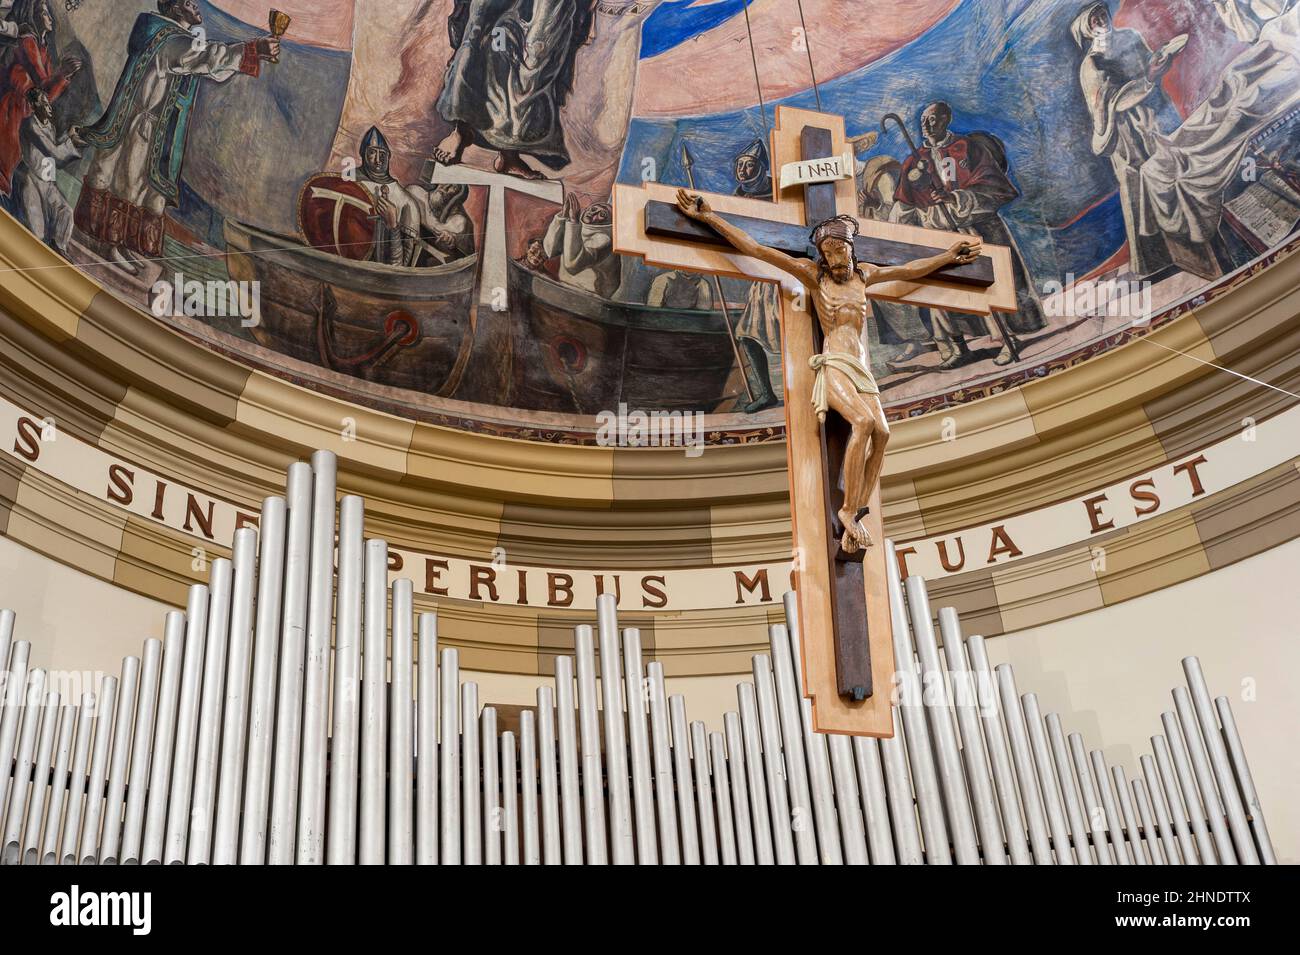 Altopascio, Lucca, Italy - 2015, May 13: Crucified Christ in the church of San Jacopo Maggiore. Stock Photo